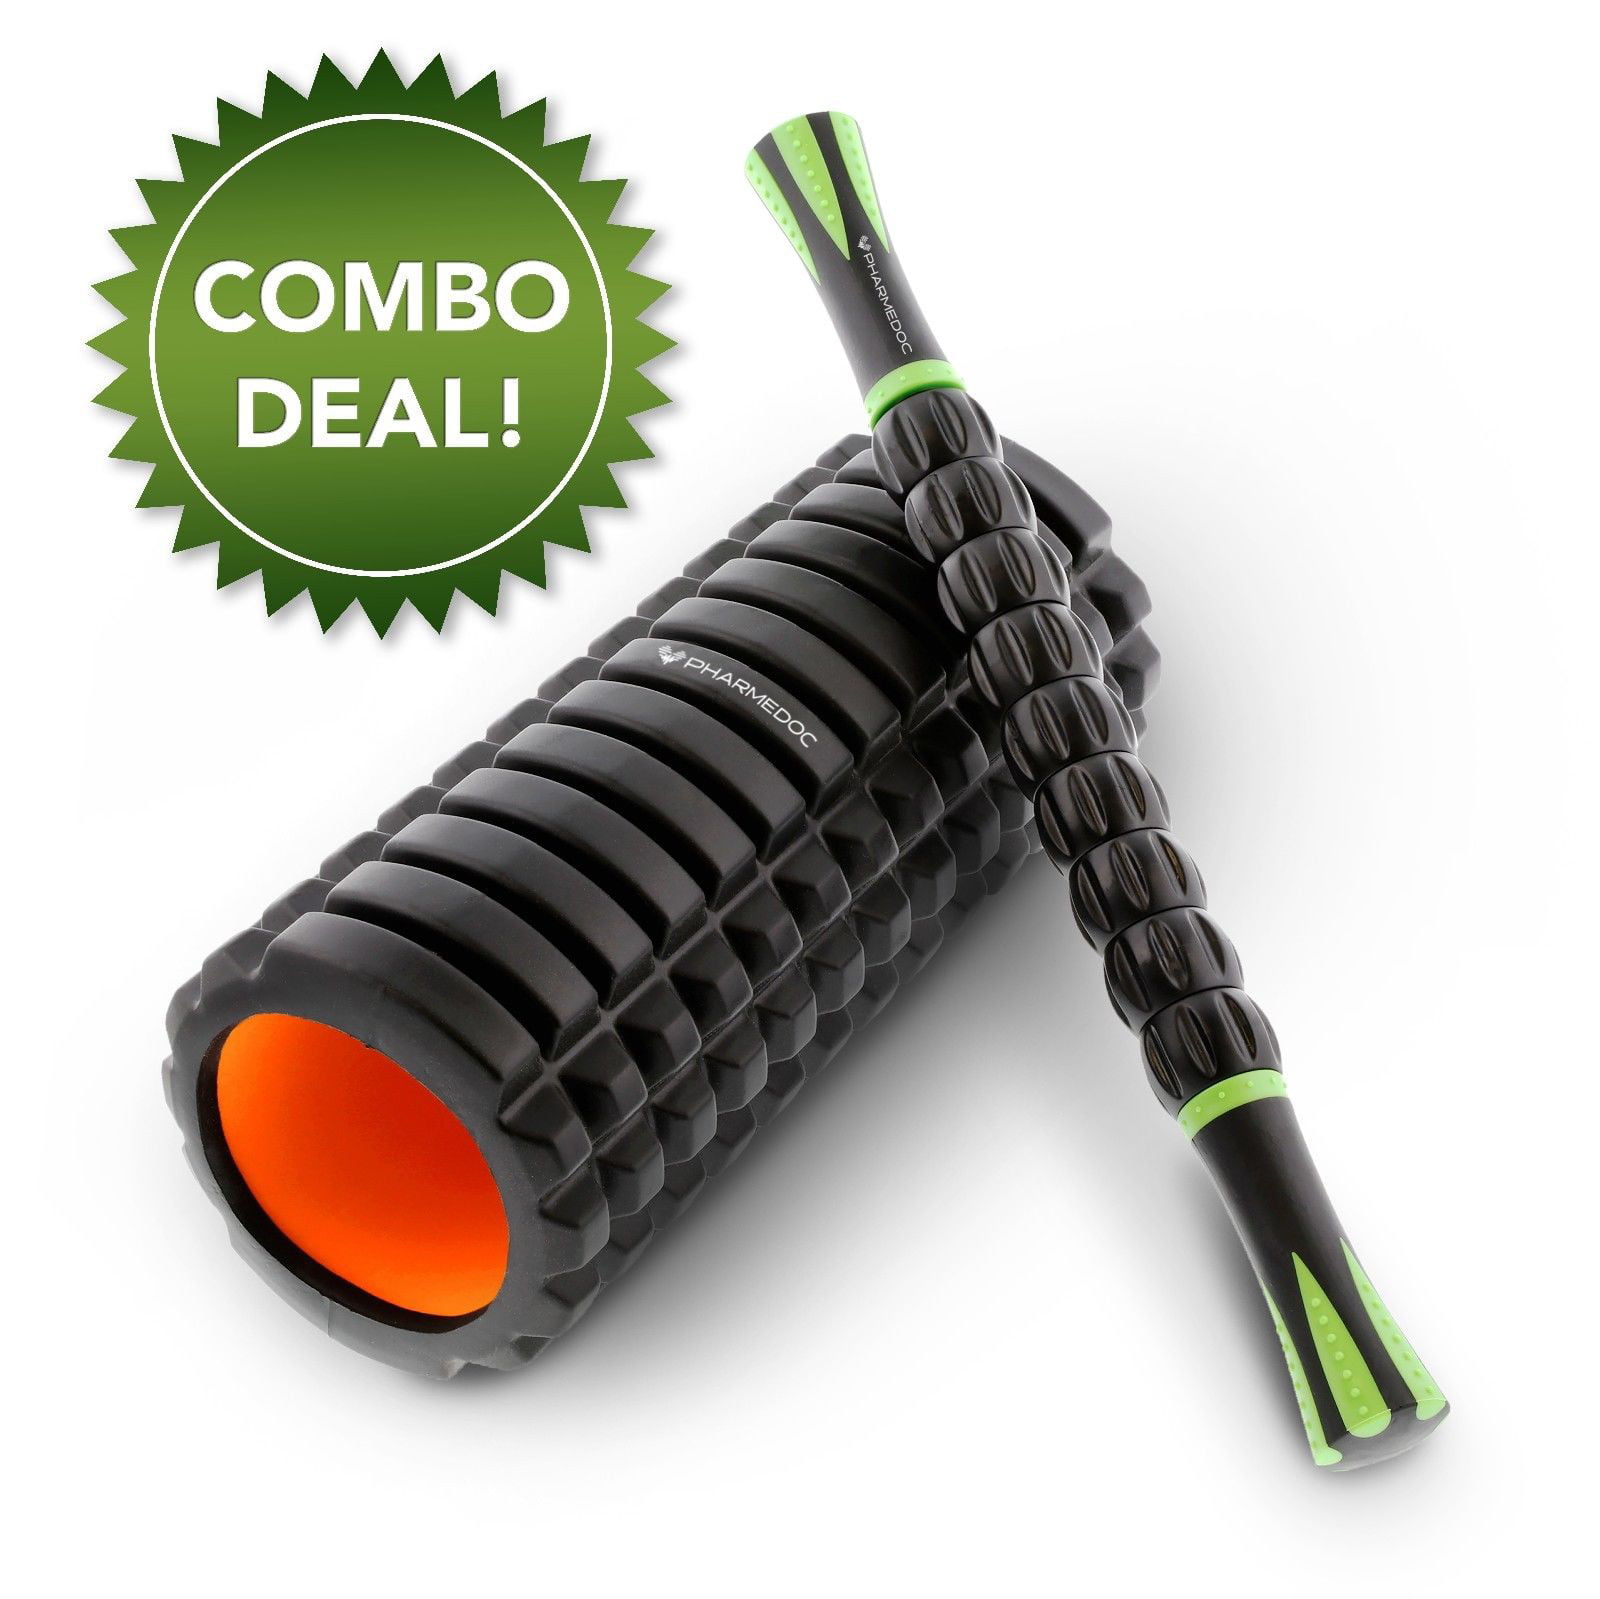 Foam Roller 3 in 1 Yoga  Fitness Exercise Physical Trigger Massage Stick Boundle 